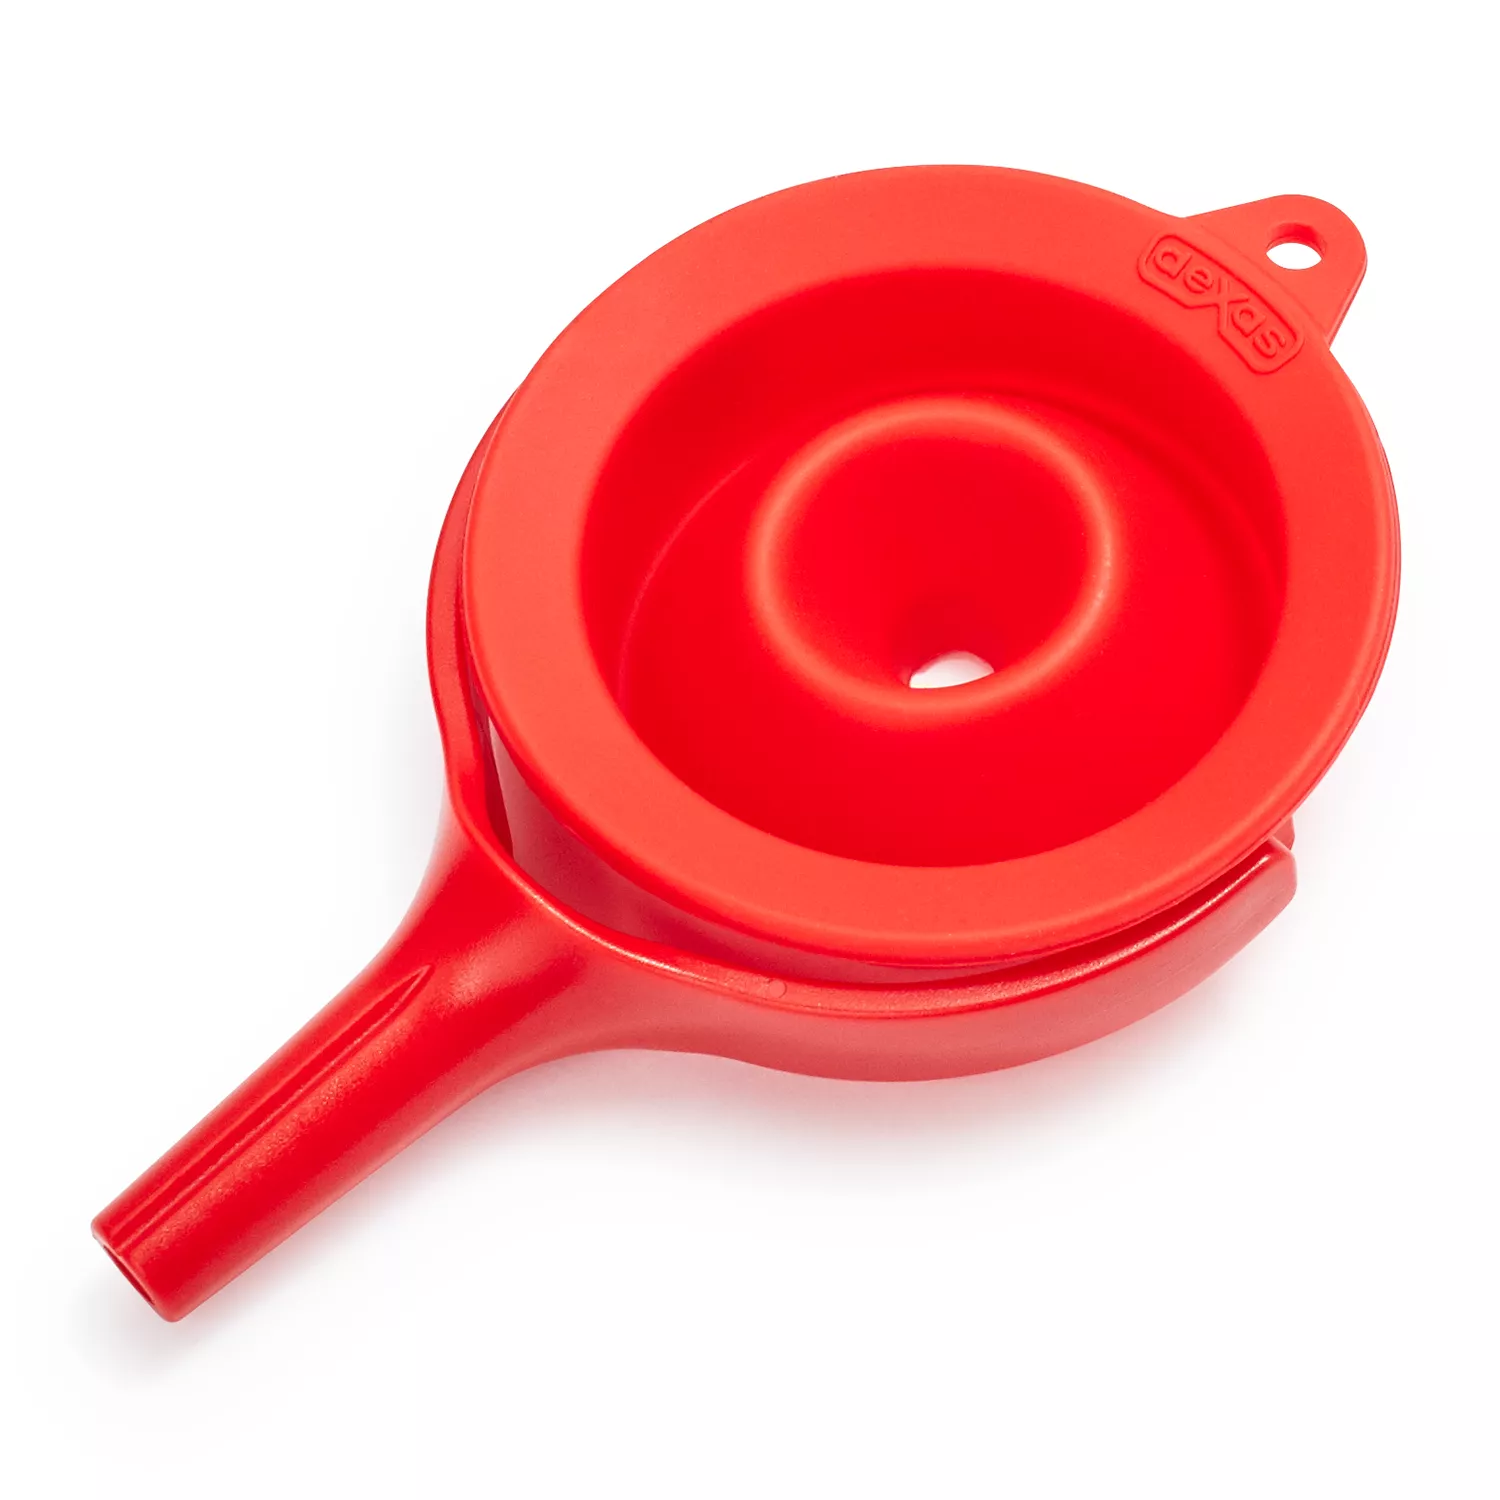 Dexas 2-Cup Collapsible Measuring Cup, Red